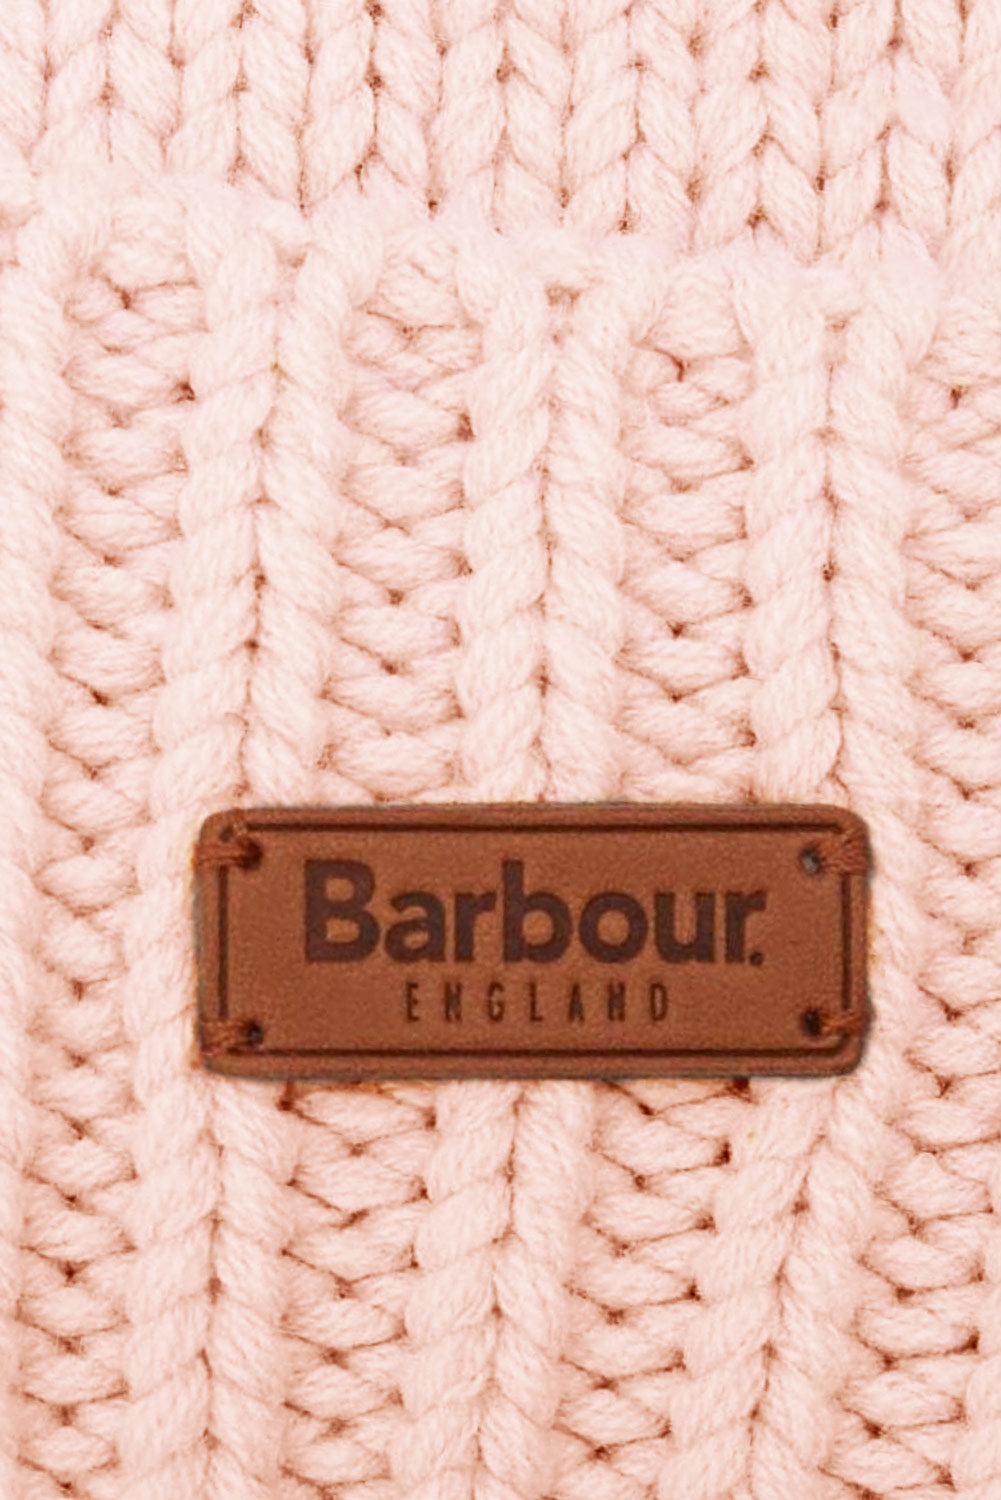 barbour hat and scarf set